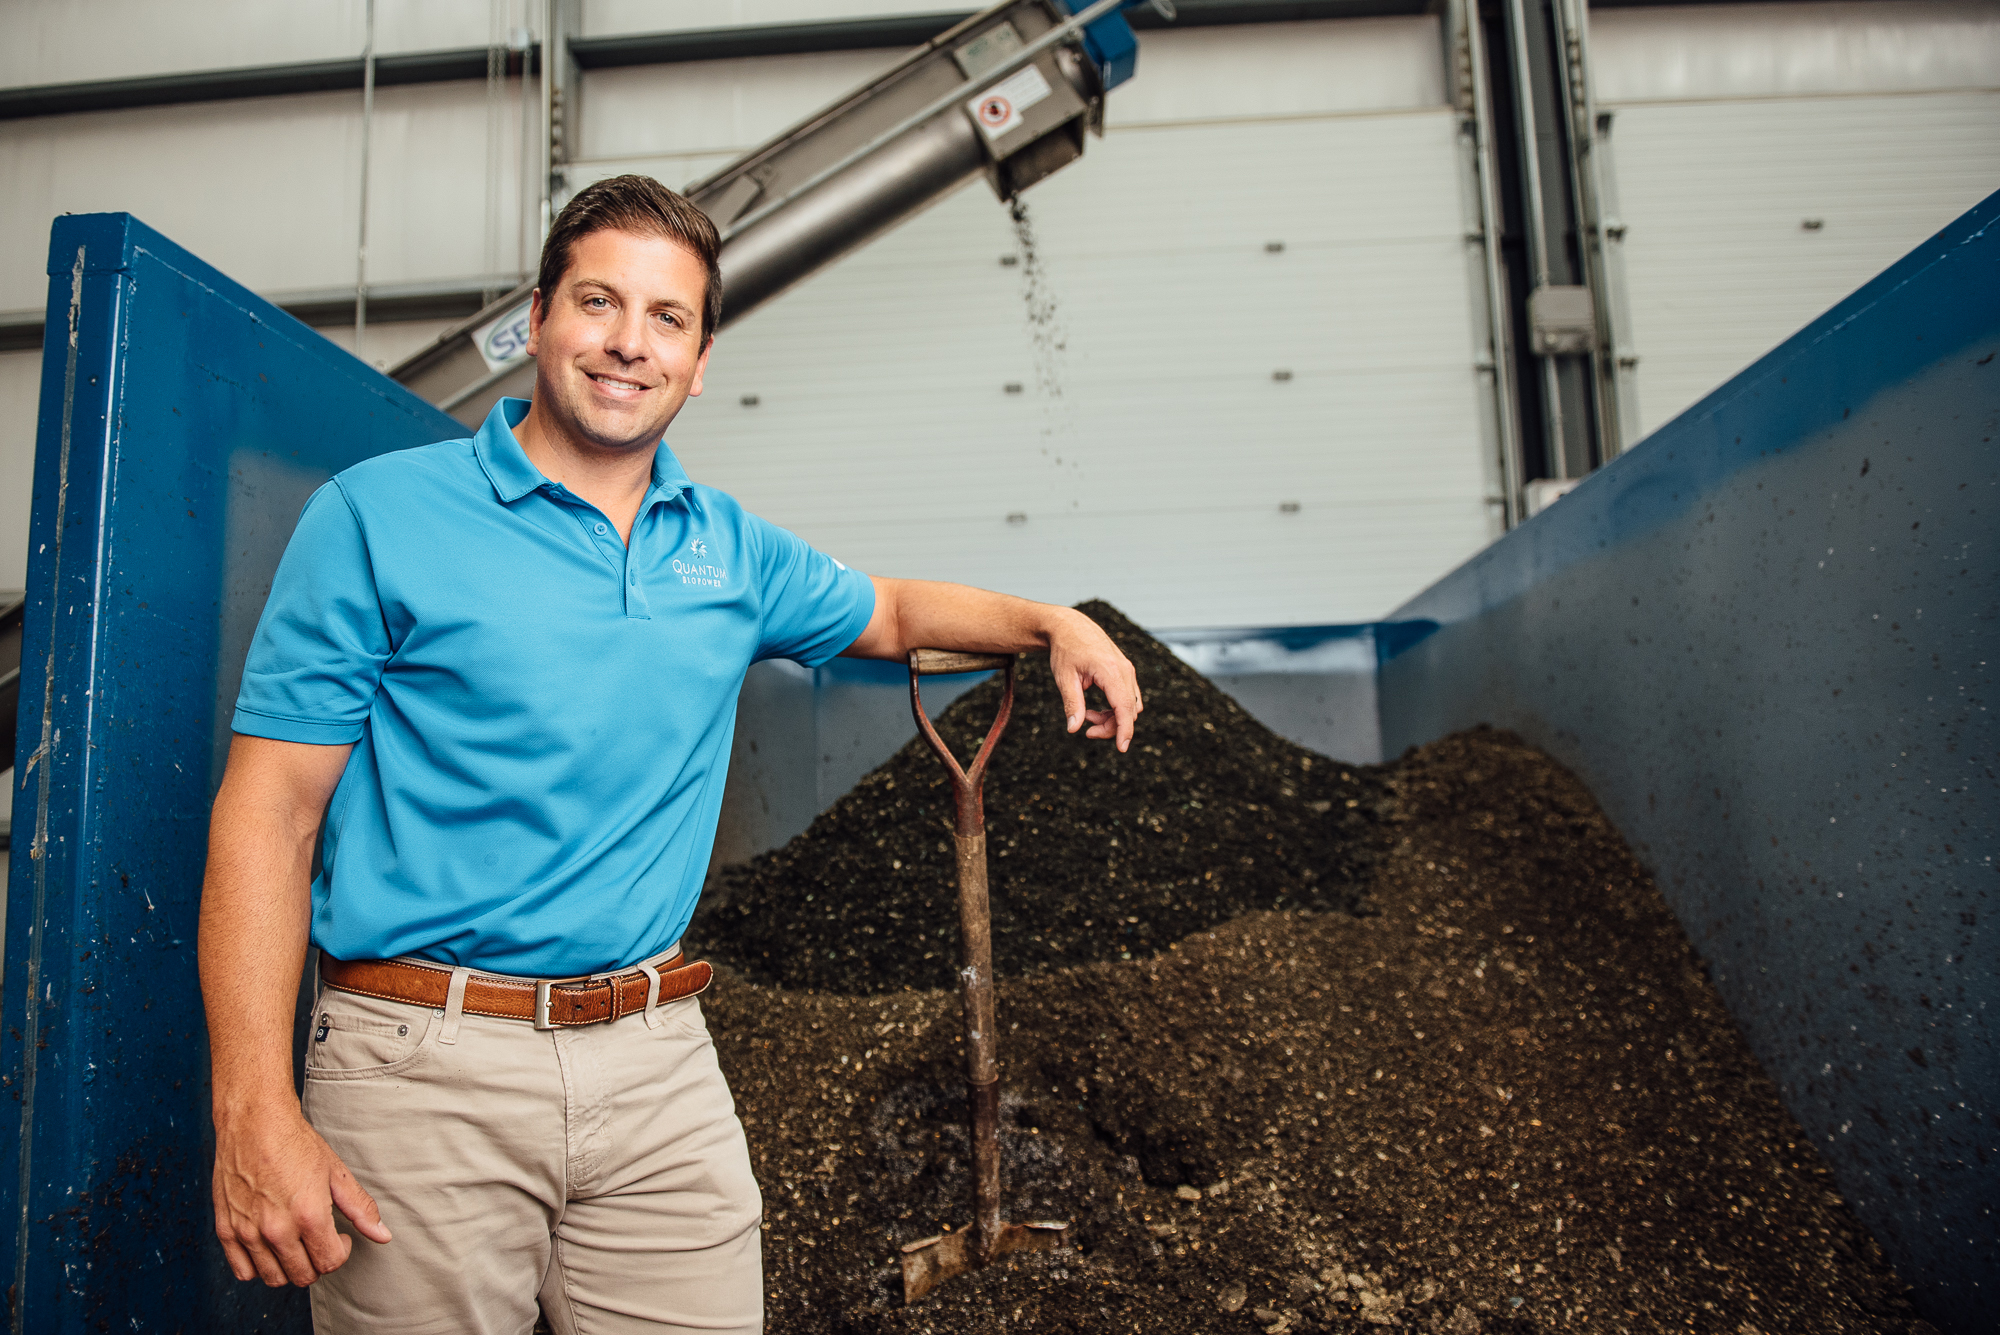 UConn alumnus Brian Paganini '03 (BUS) designed and runs ‘Quantum Biopower,’ Connecticut’s first food waste-to-energy facility. (Nathan Oldham/UConn Photo)